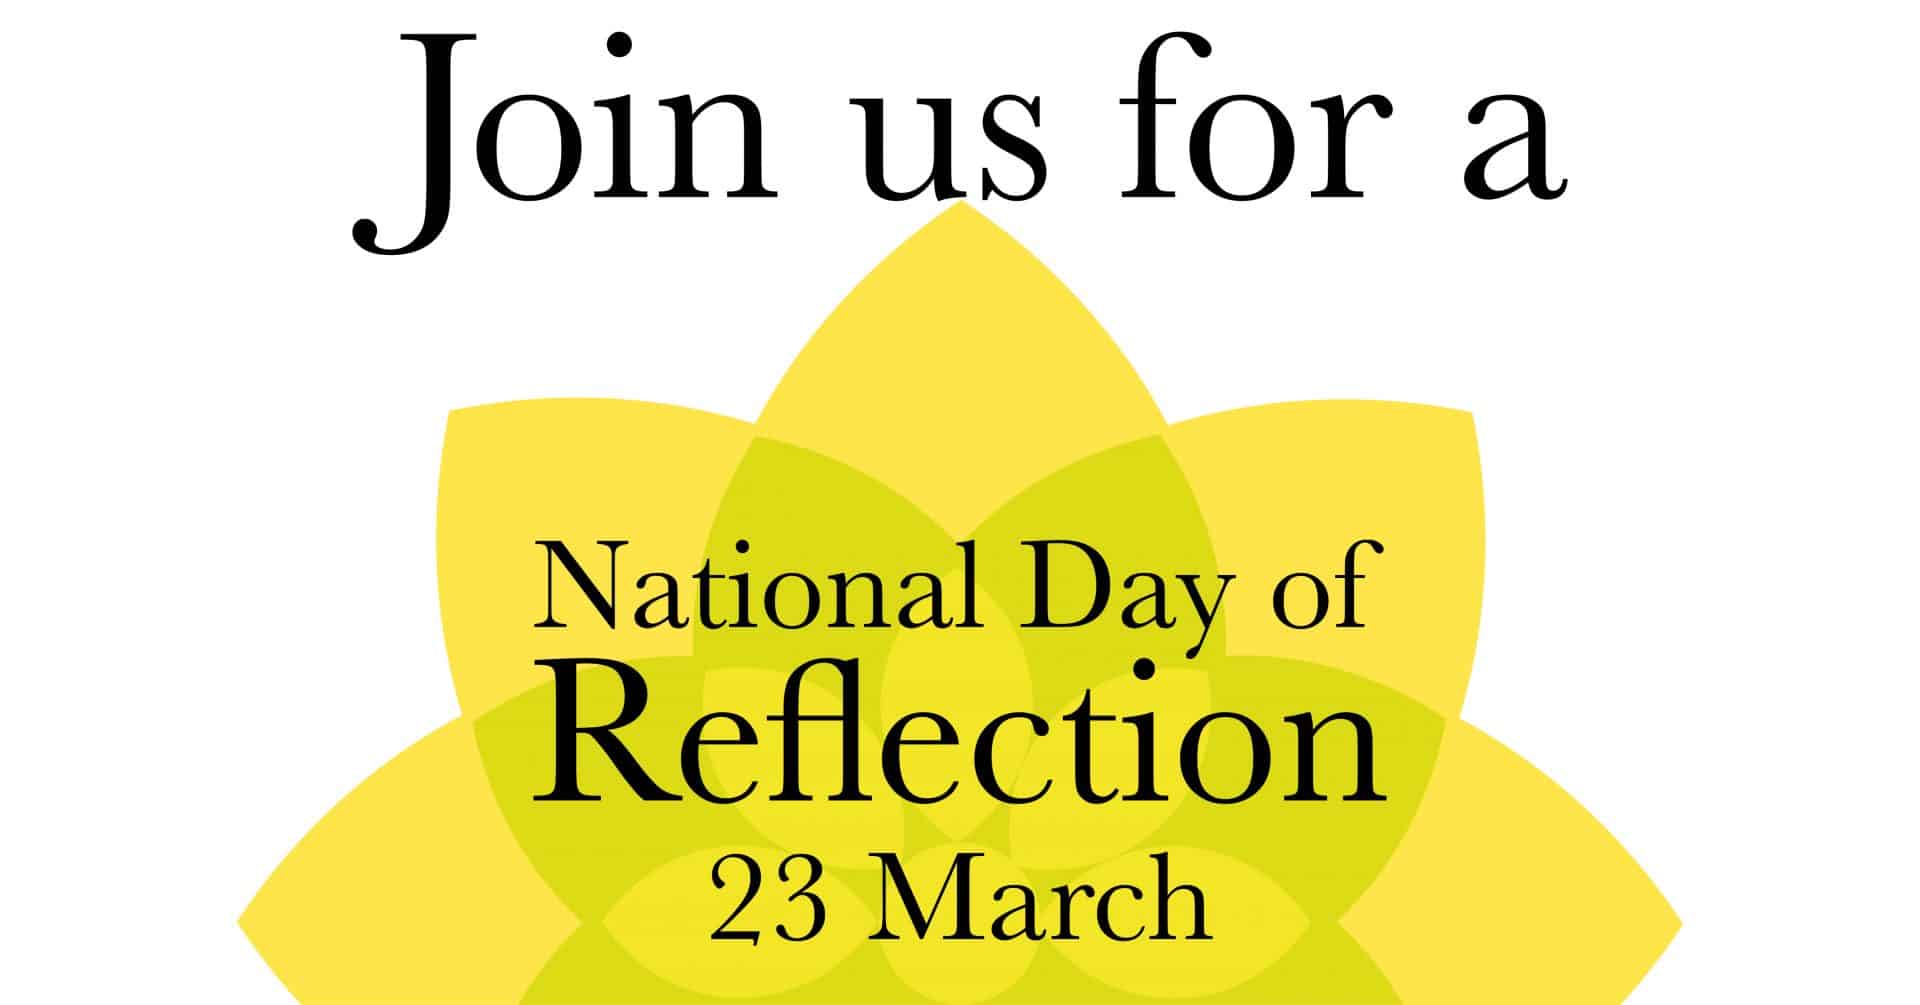 Join us in supporting today's National Day of Reflection